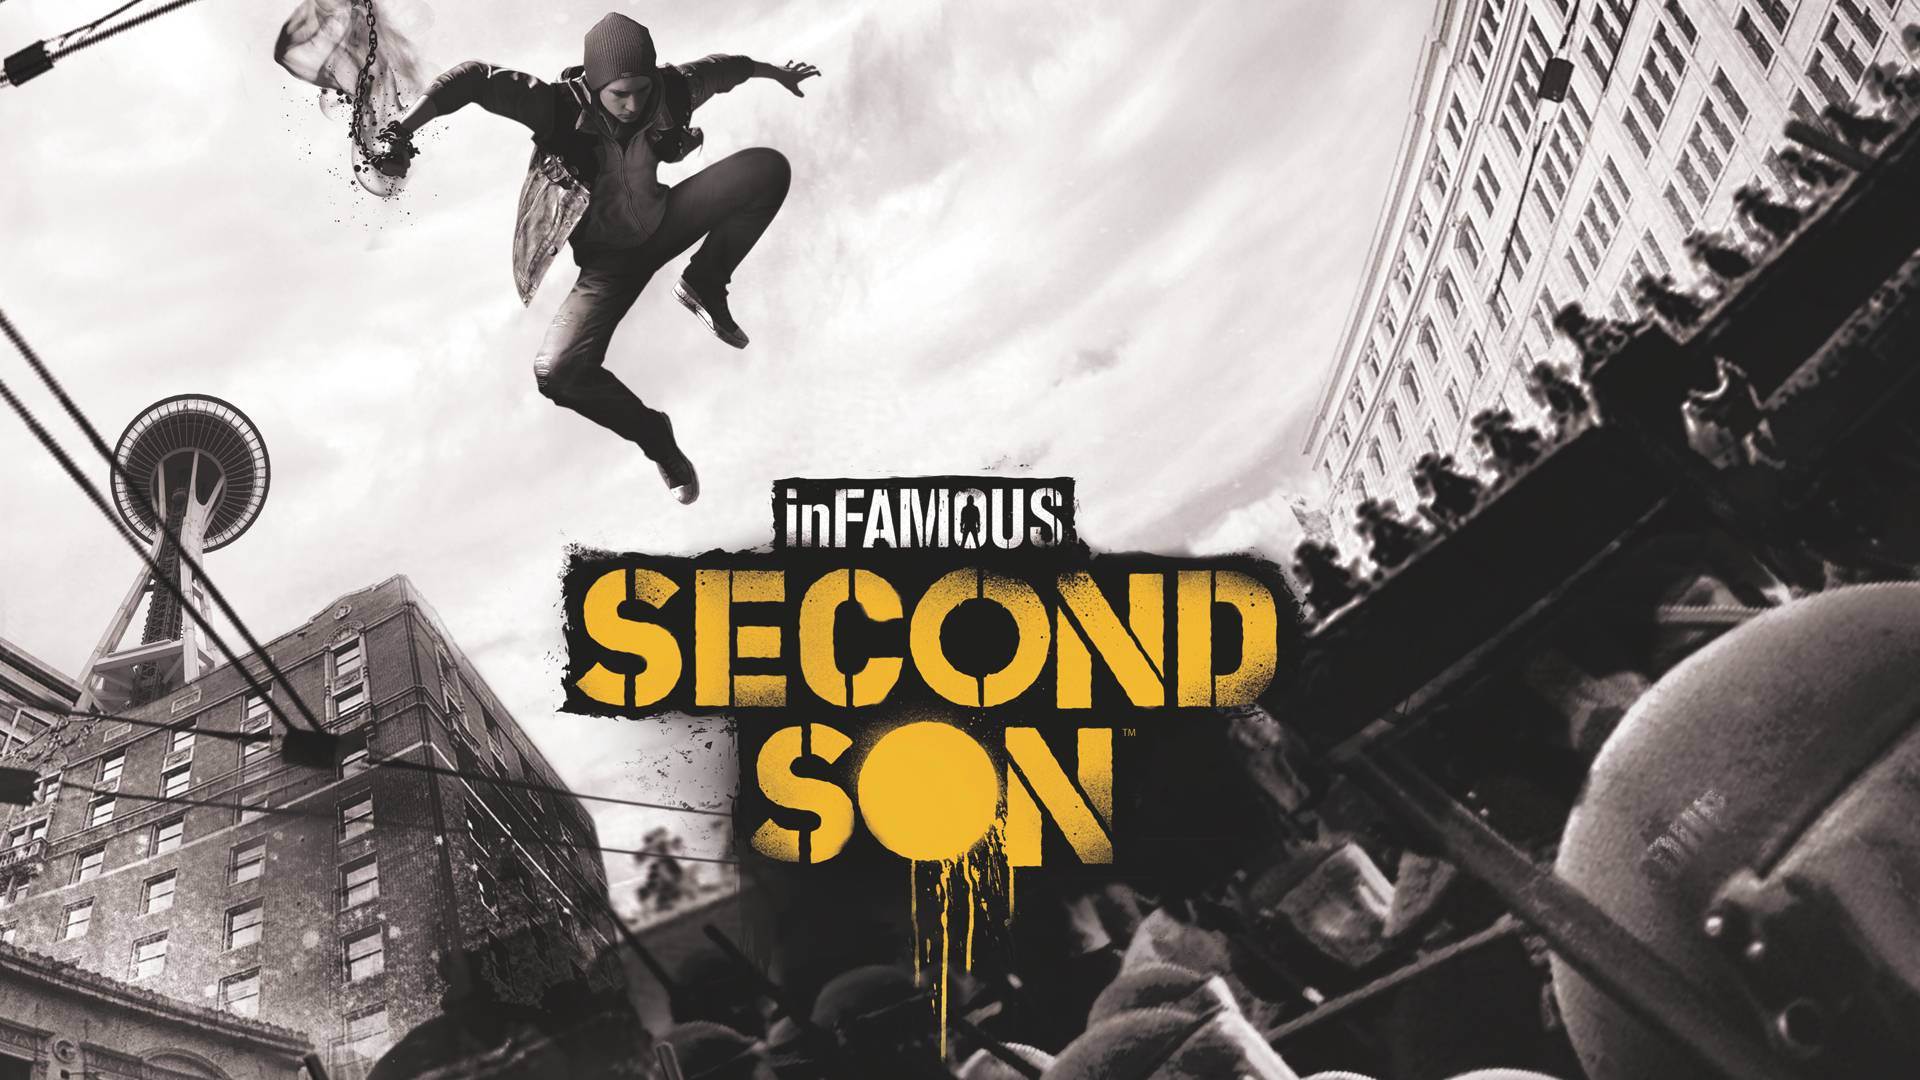 inFamous Second Son PS4 Sony